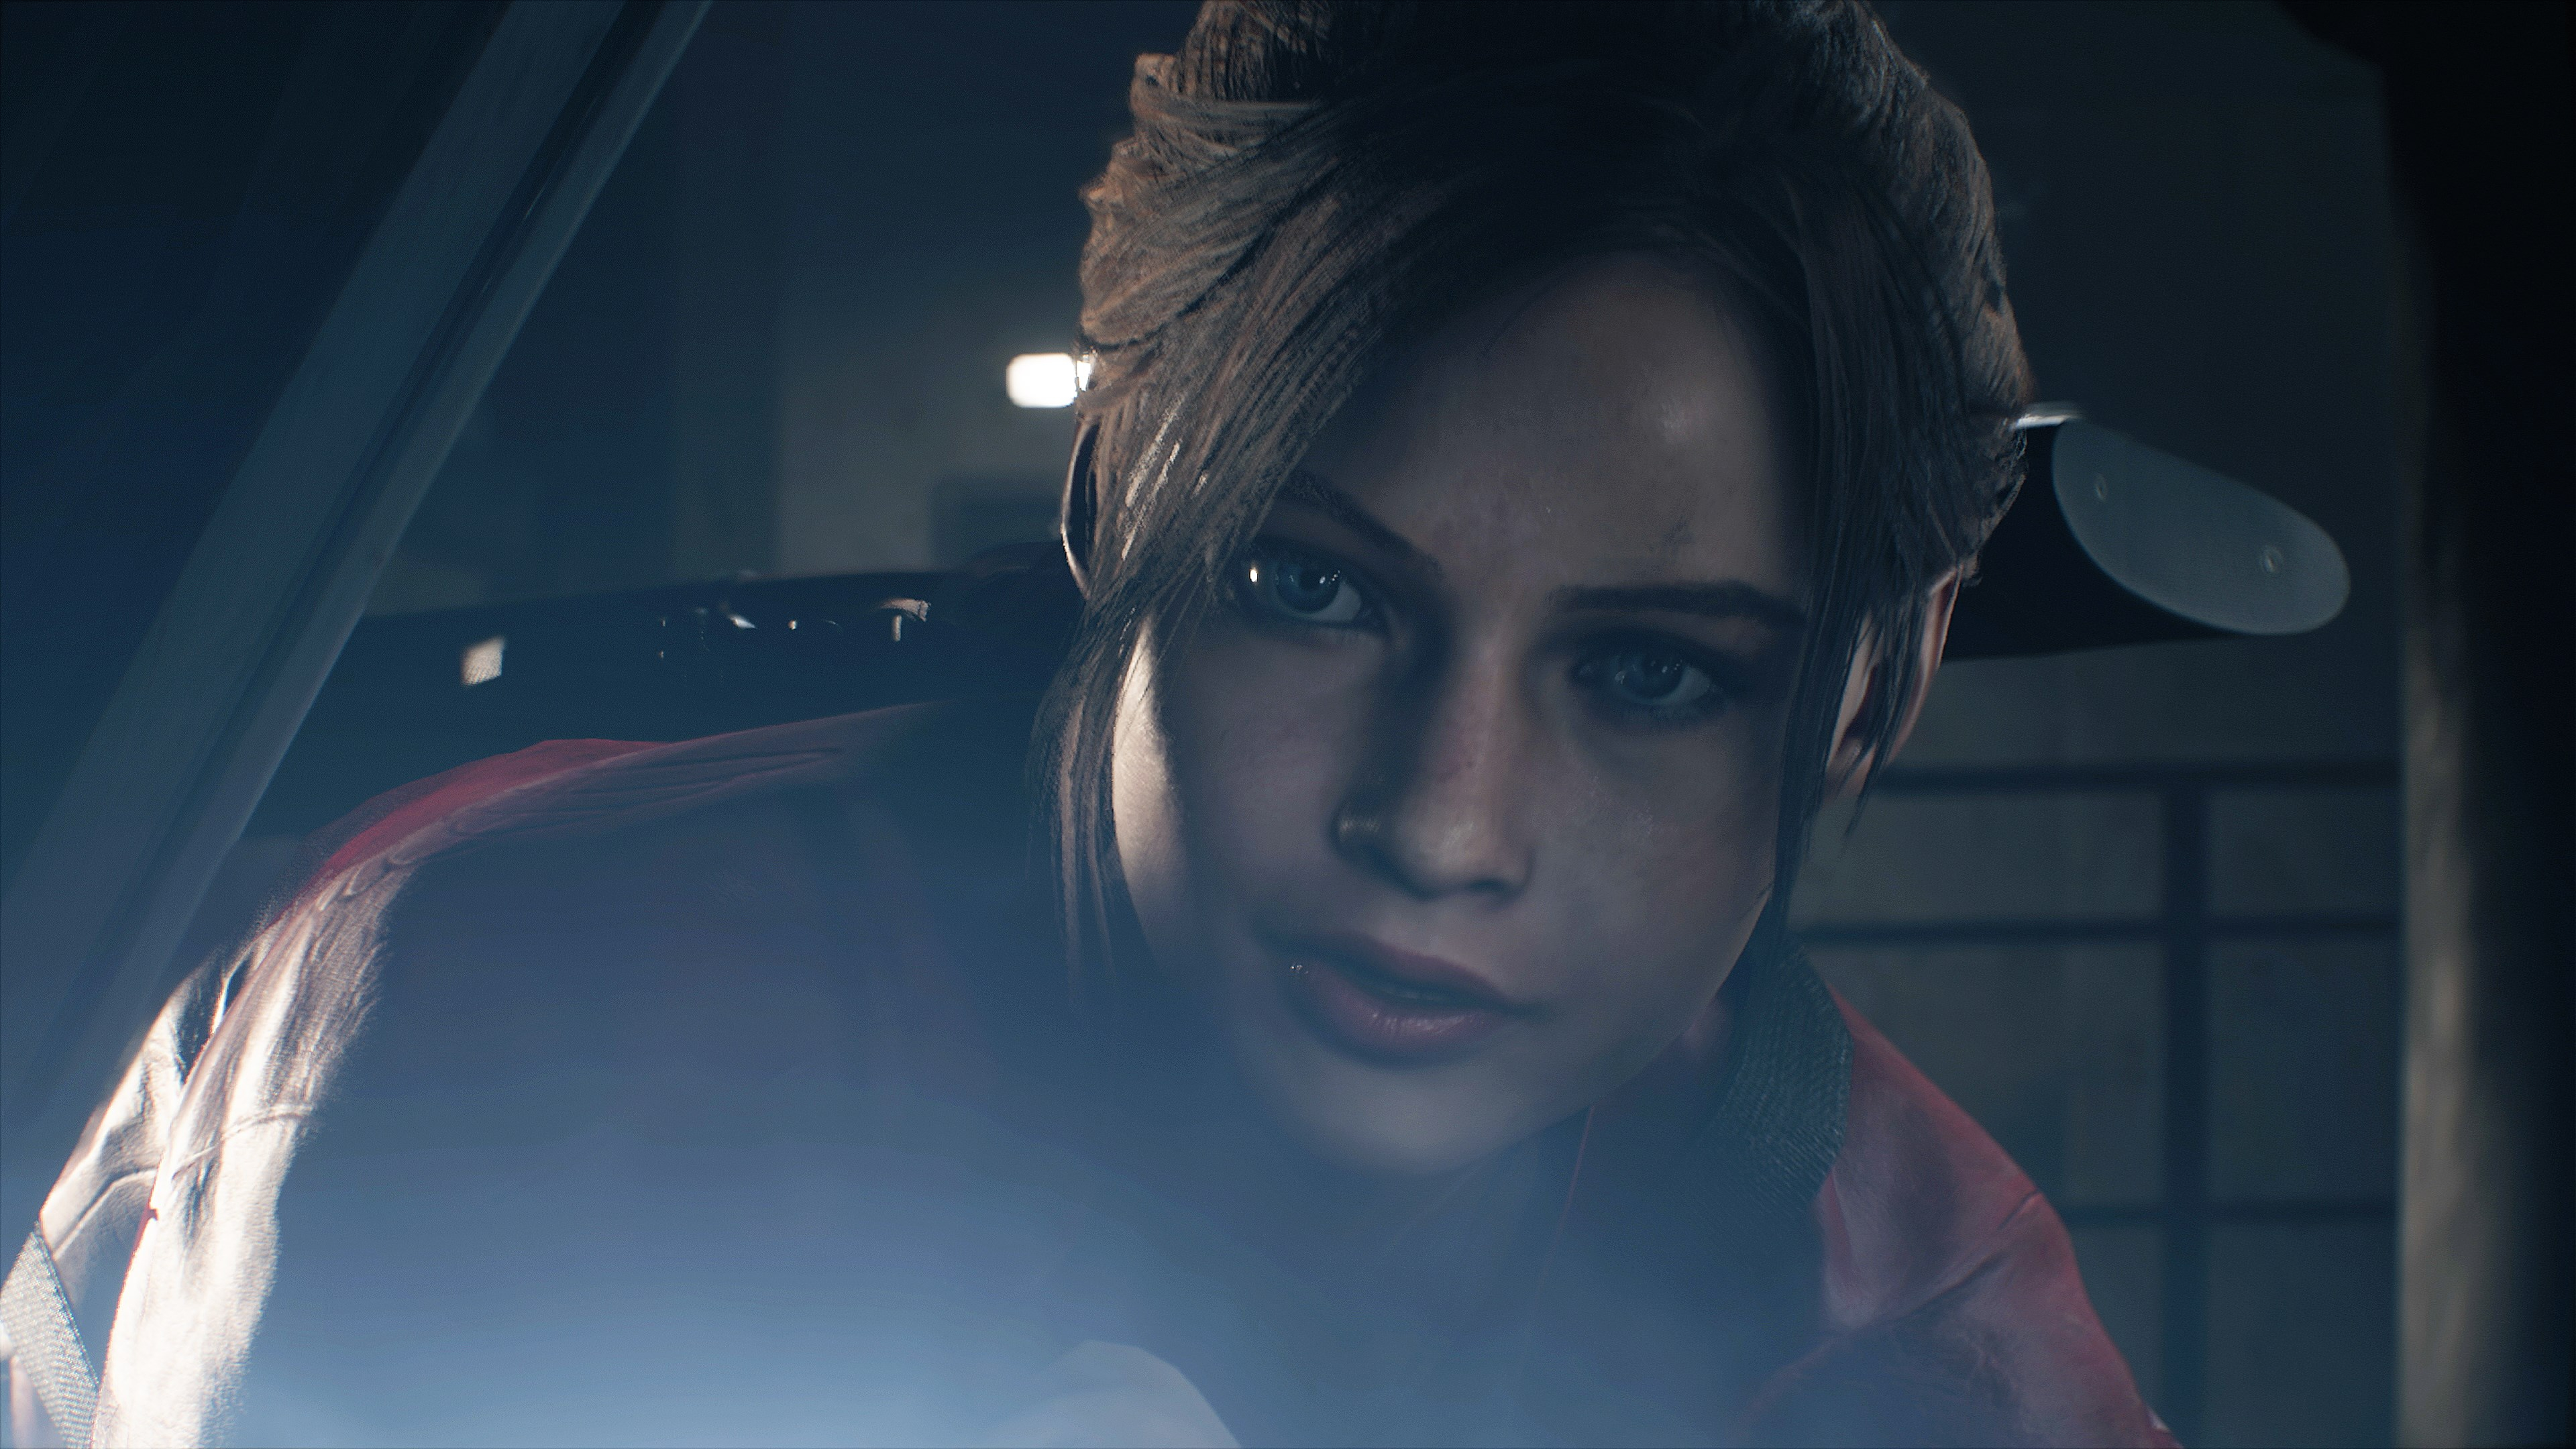 3840x2160 1920x1080 Resident Evil 2 Biohazard 4K Laptop Full HD 1080P HD 4k Wallpapers, Images, Backgrounds, Photos and Pictures